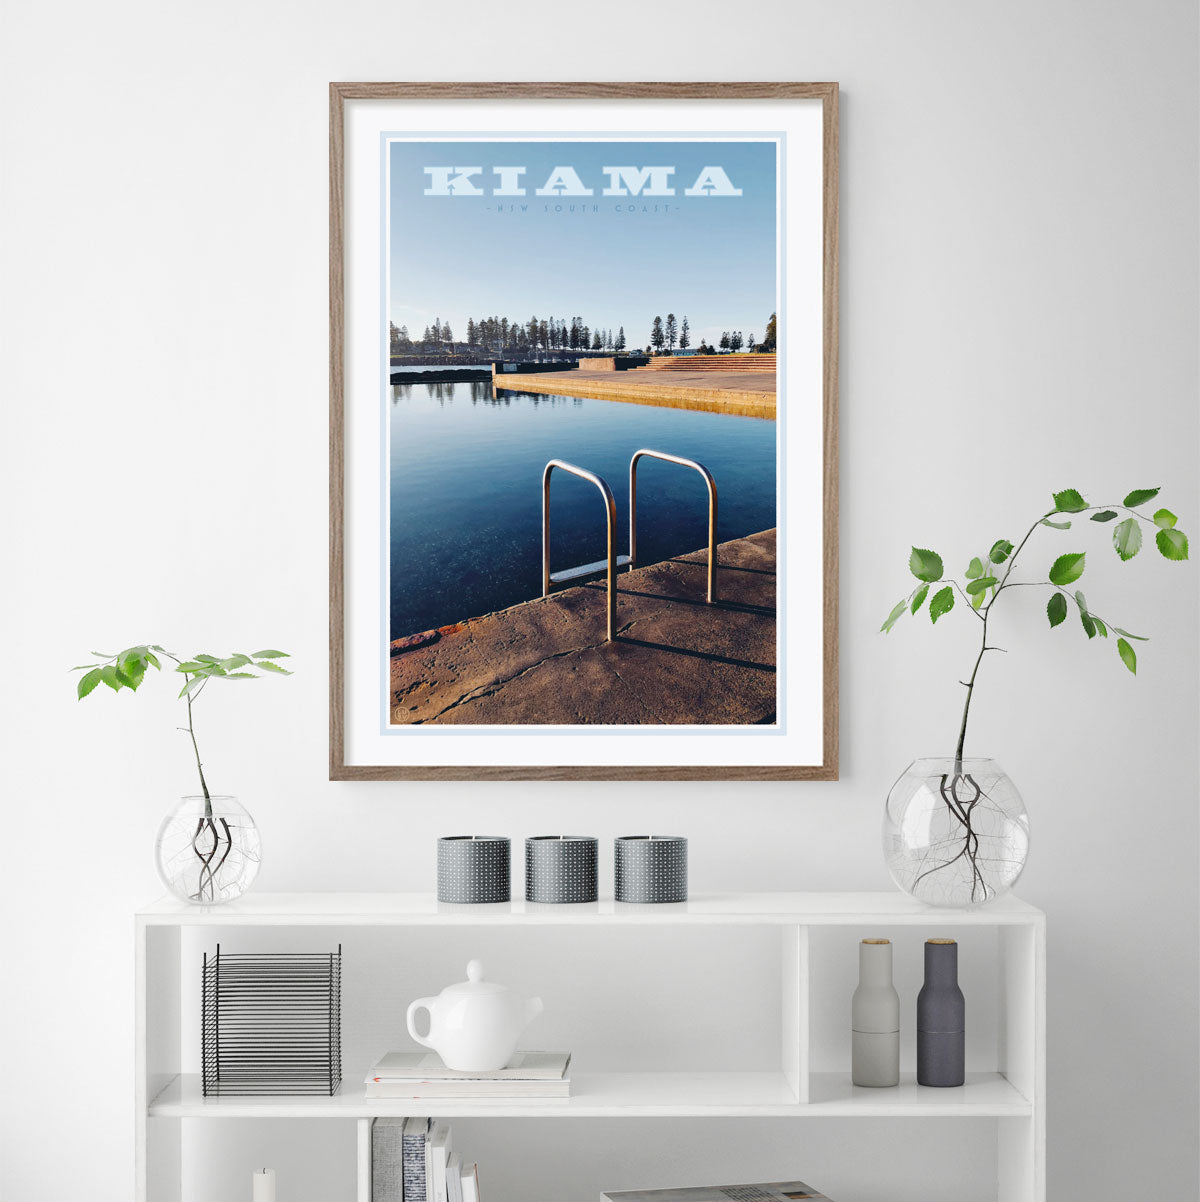 Kiama Pool Print framed in raw timber. Vintage travel style poster by places we love